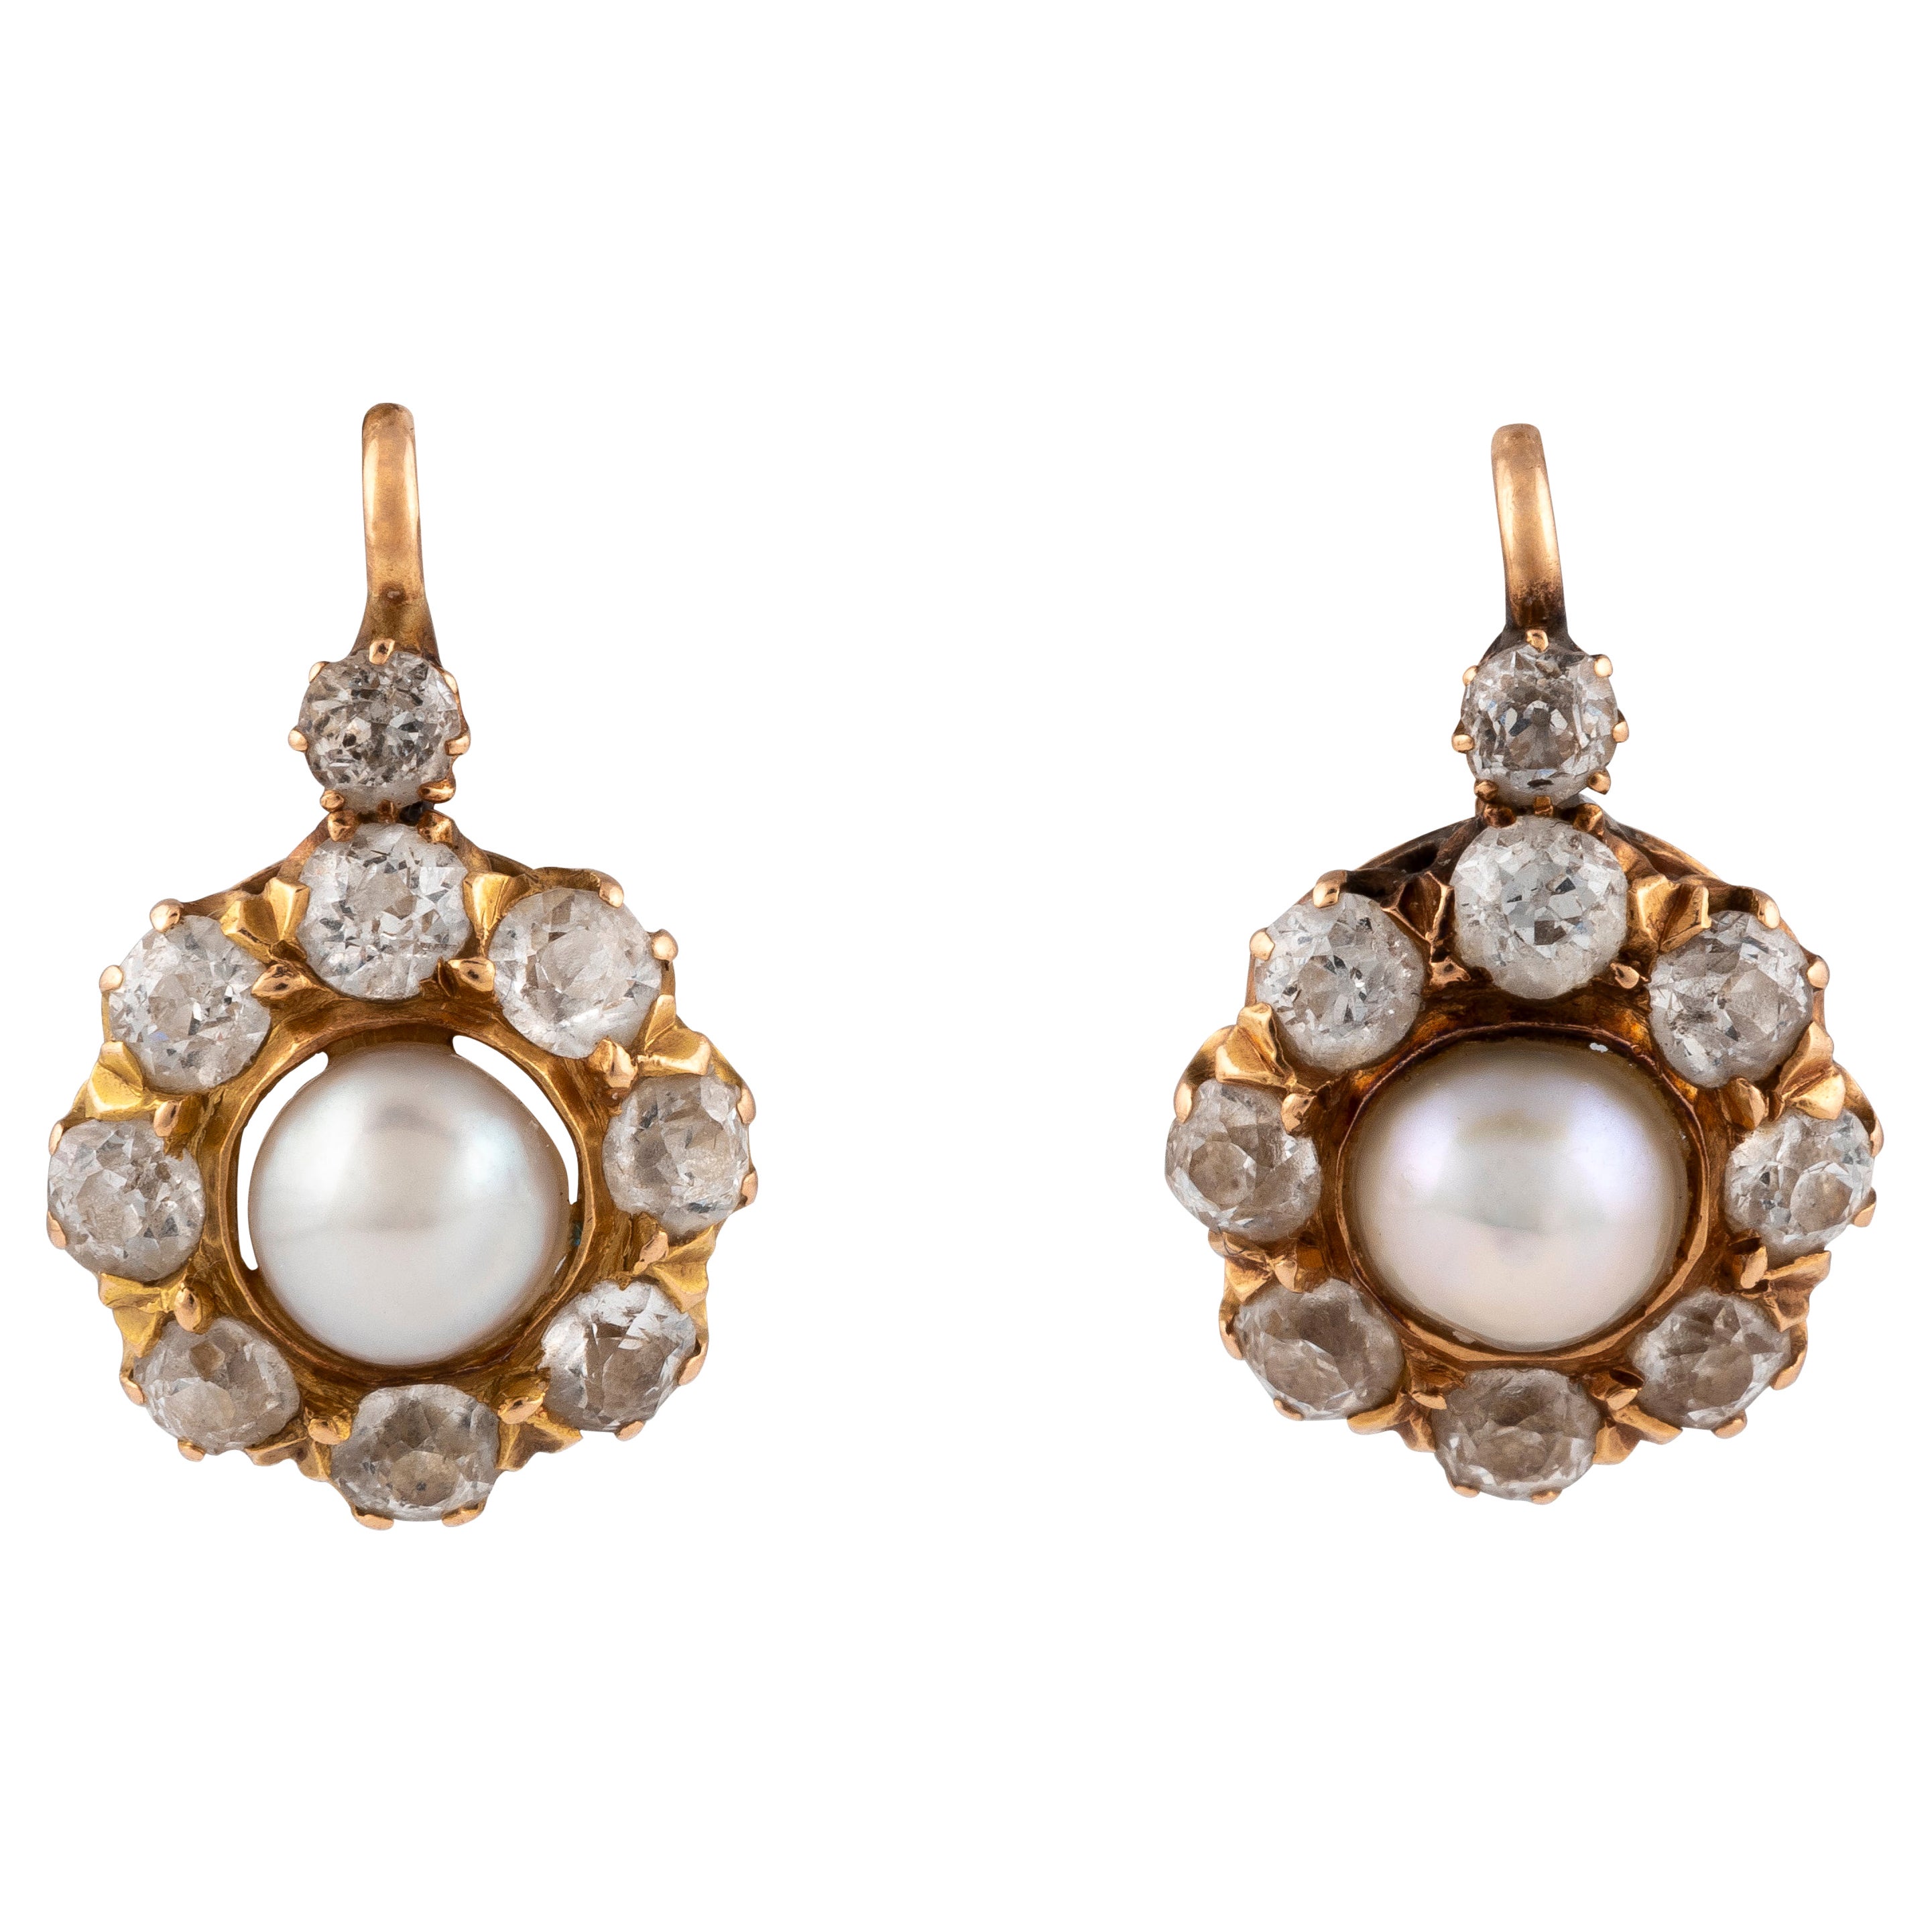 Napoleon III Pair of Ear Studs with Natural Pearl and Old Diamond